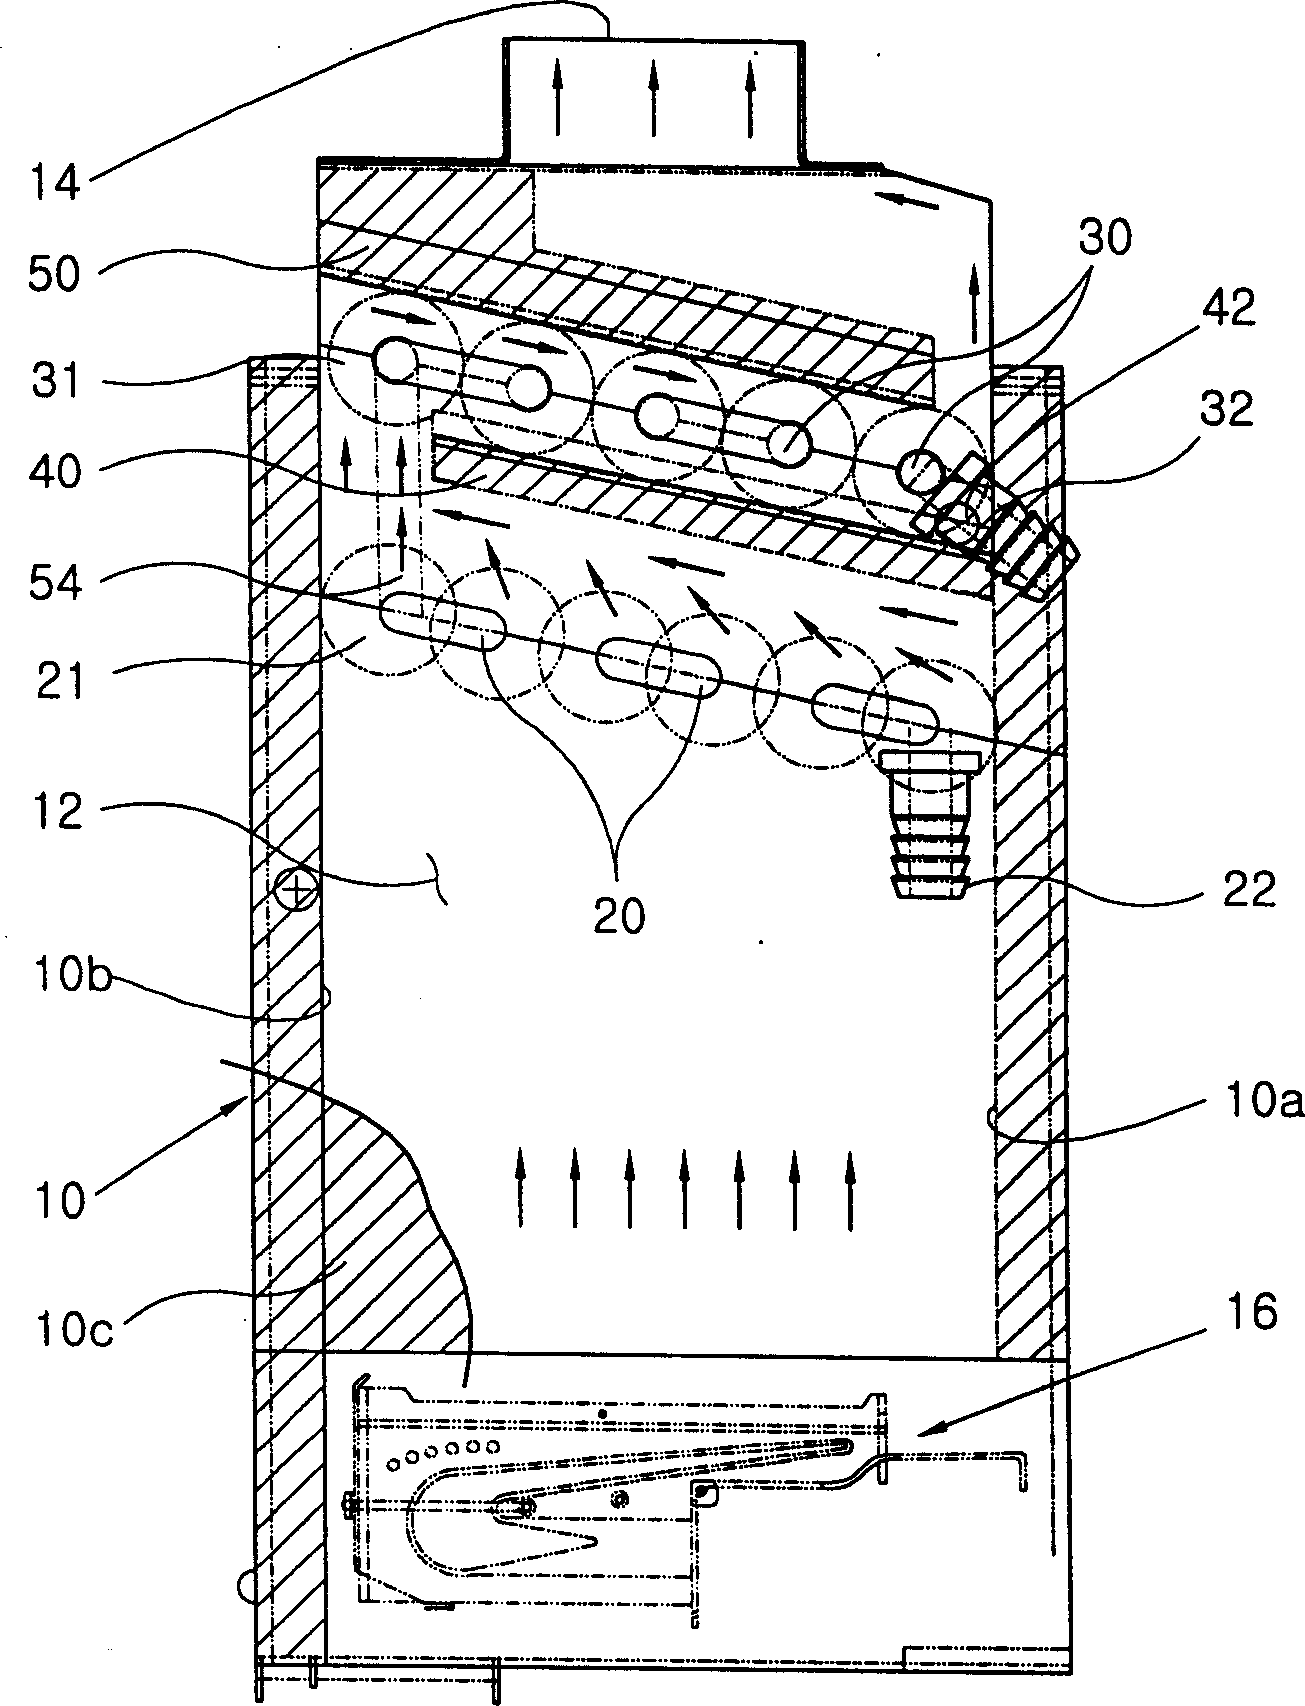 Heat exchanger structure for condensating gas-fired boiler